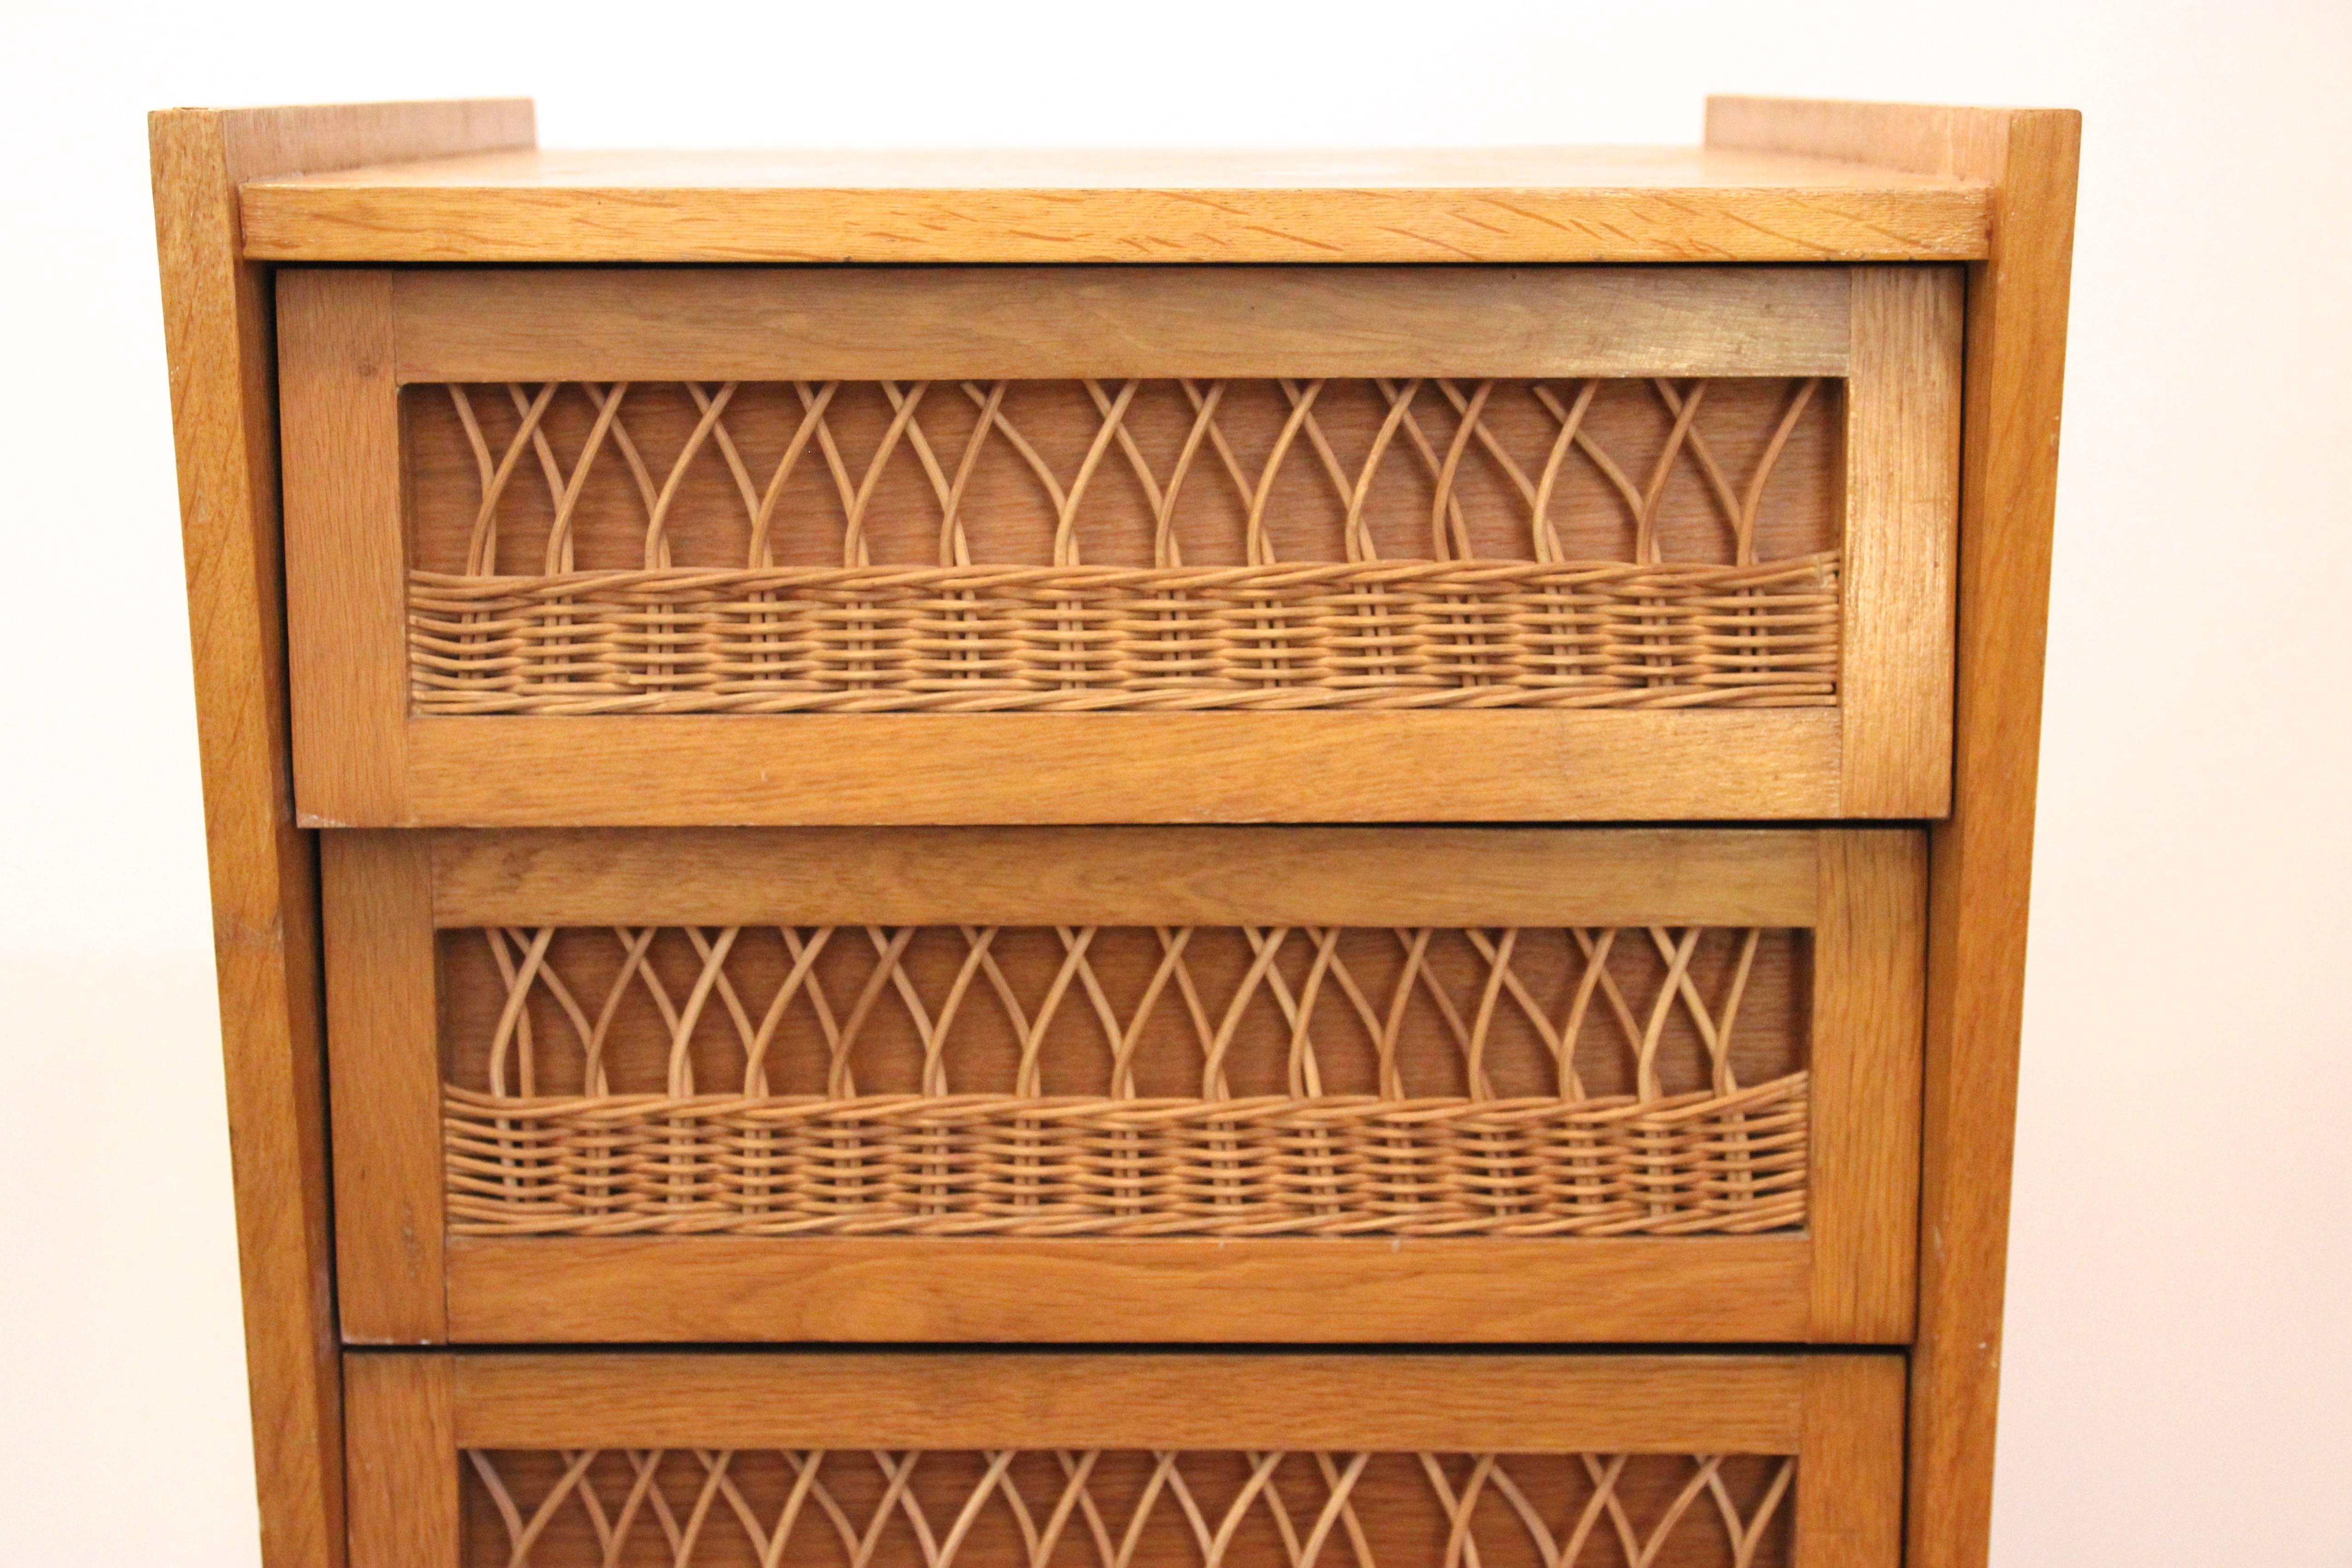 Buffets in the style of Audoux-Minet.
Wood and wicker, 
circa 1970, France.
Measures: Height: 106 cm, largeur: 52 cm, depth: 45 cm.